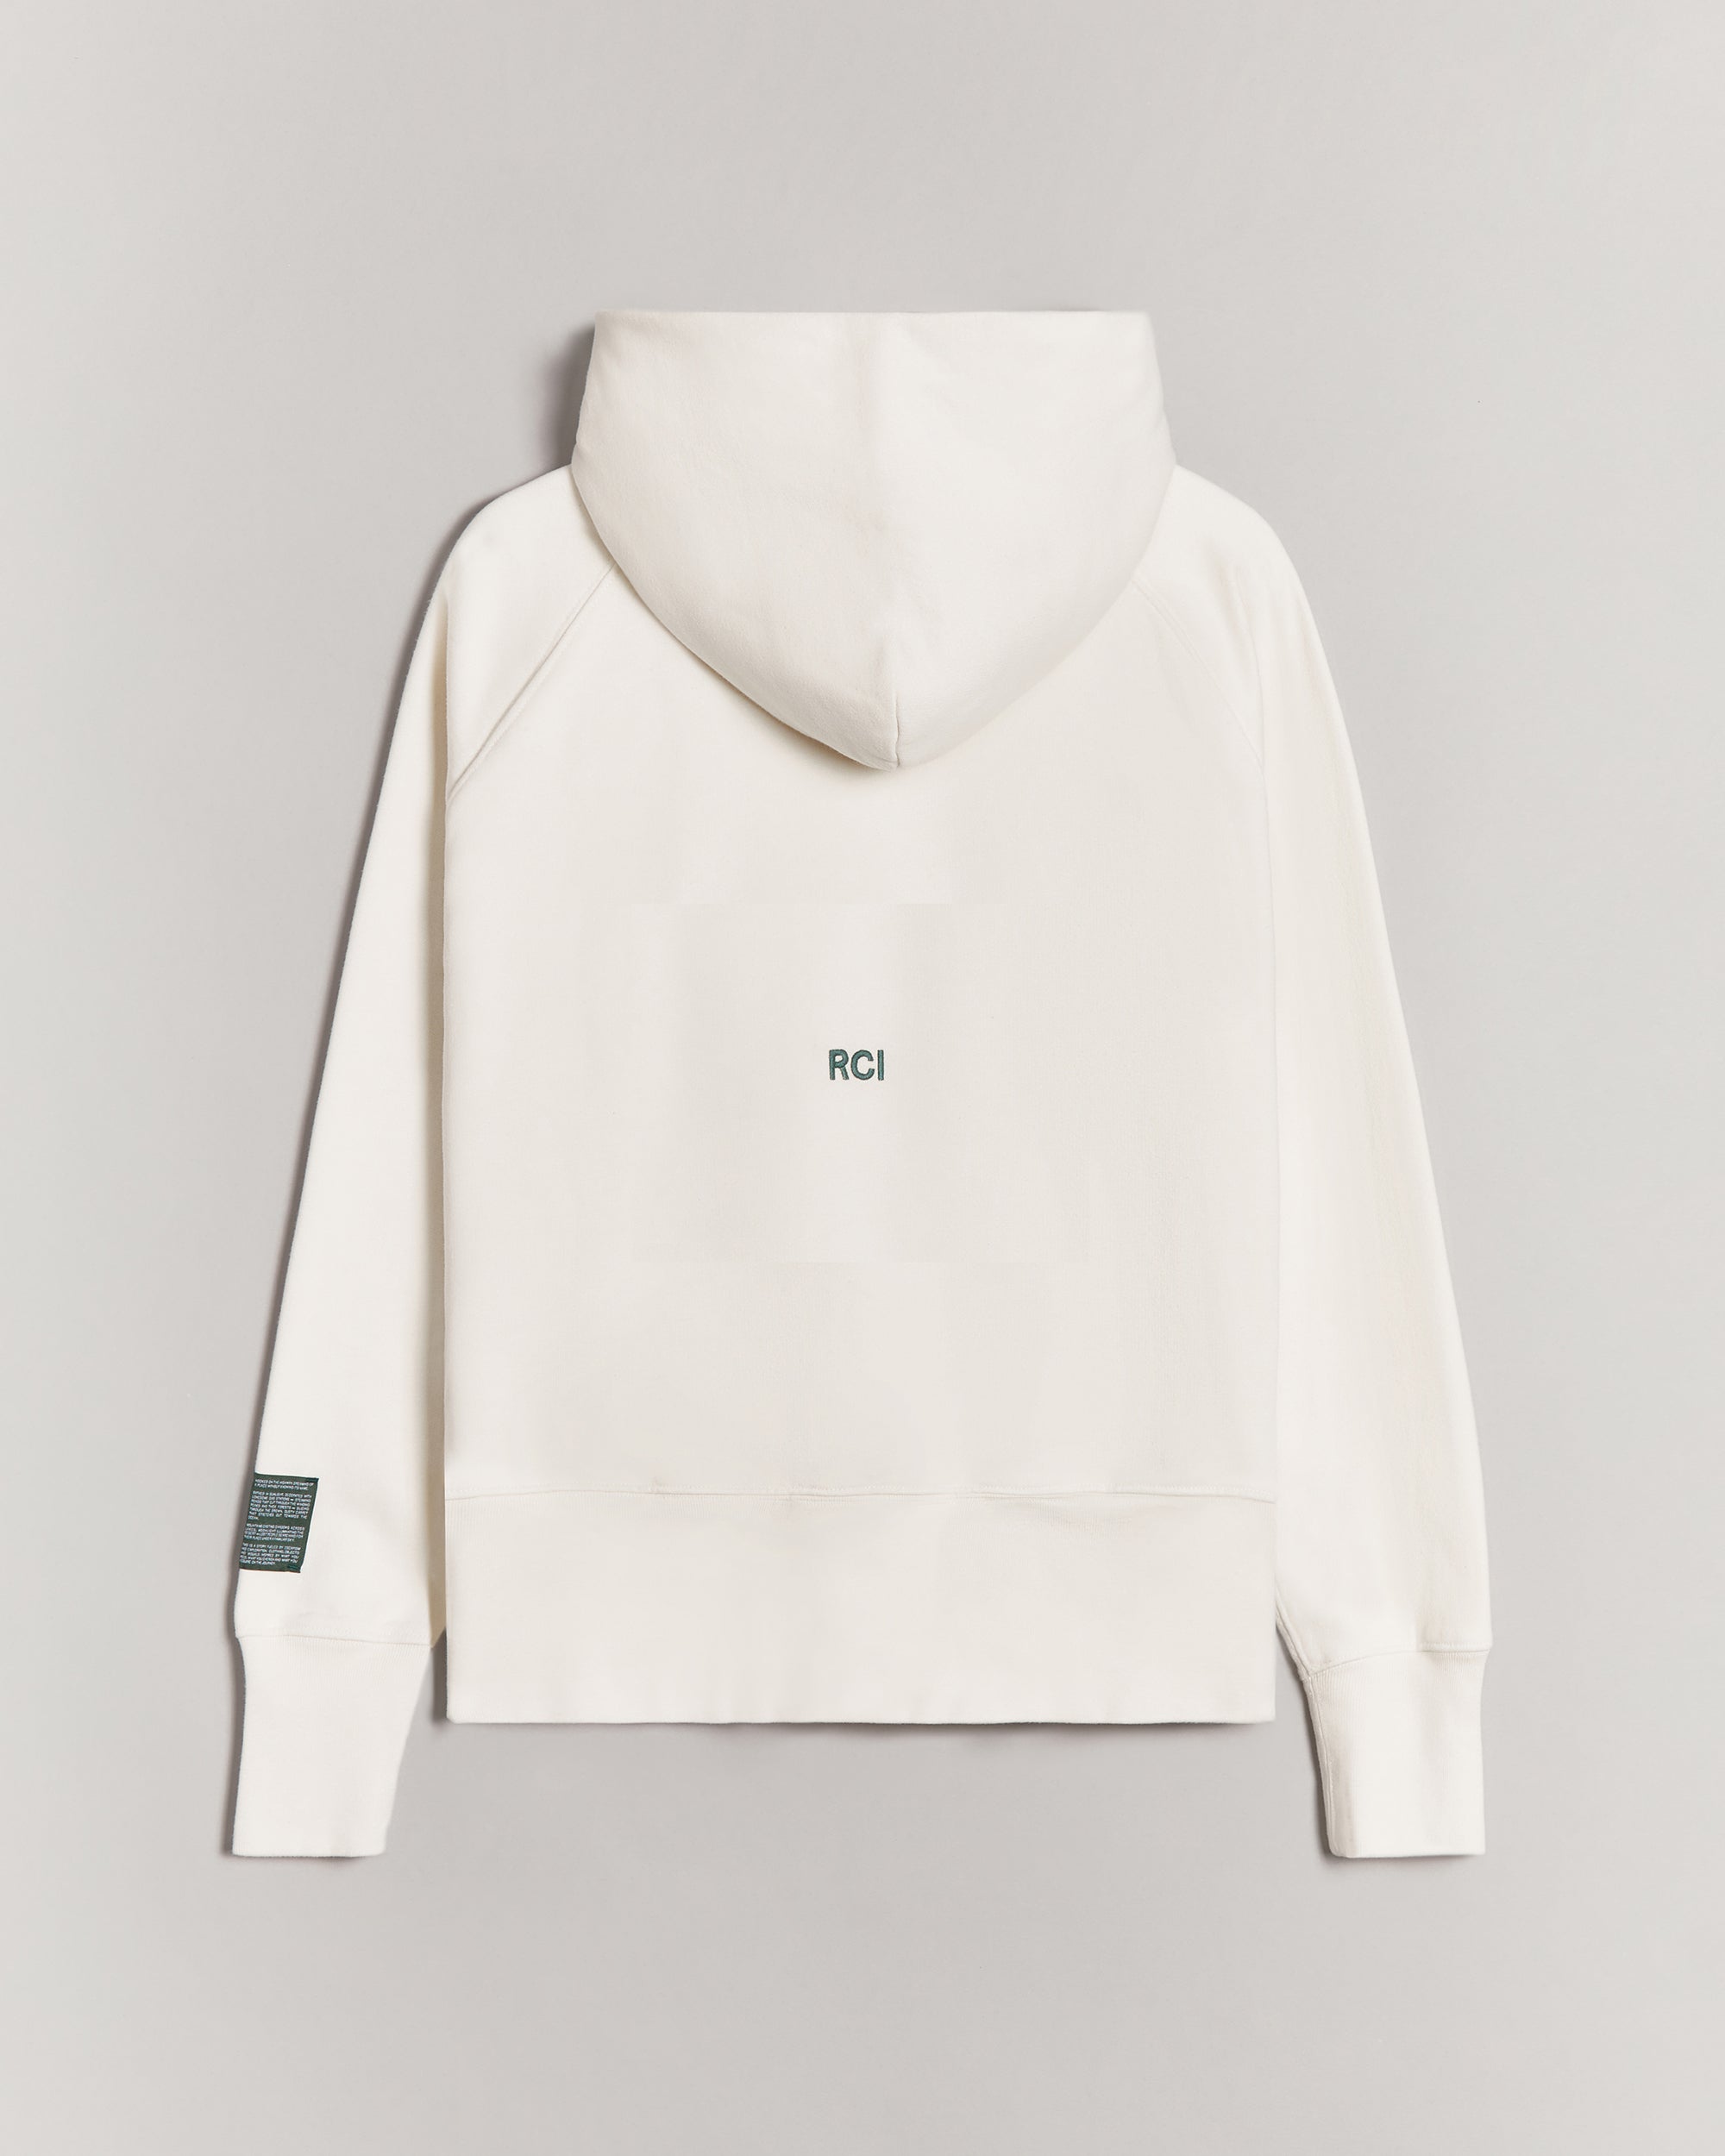 RCI x Levi's Two Pocket Hooded Sweatshirt in Natural – REESE COOPER®